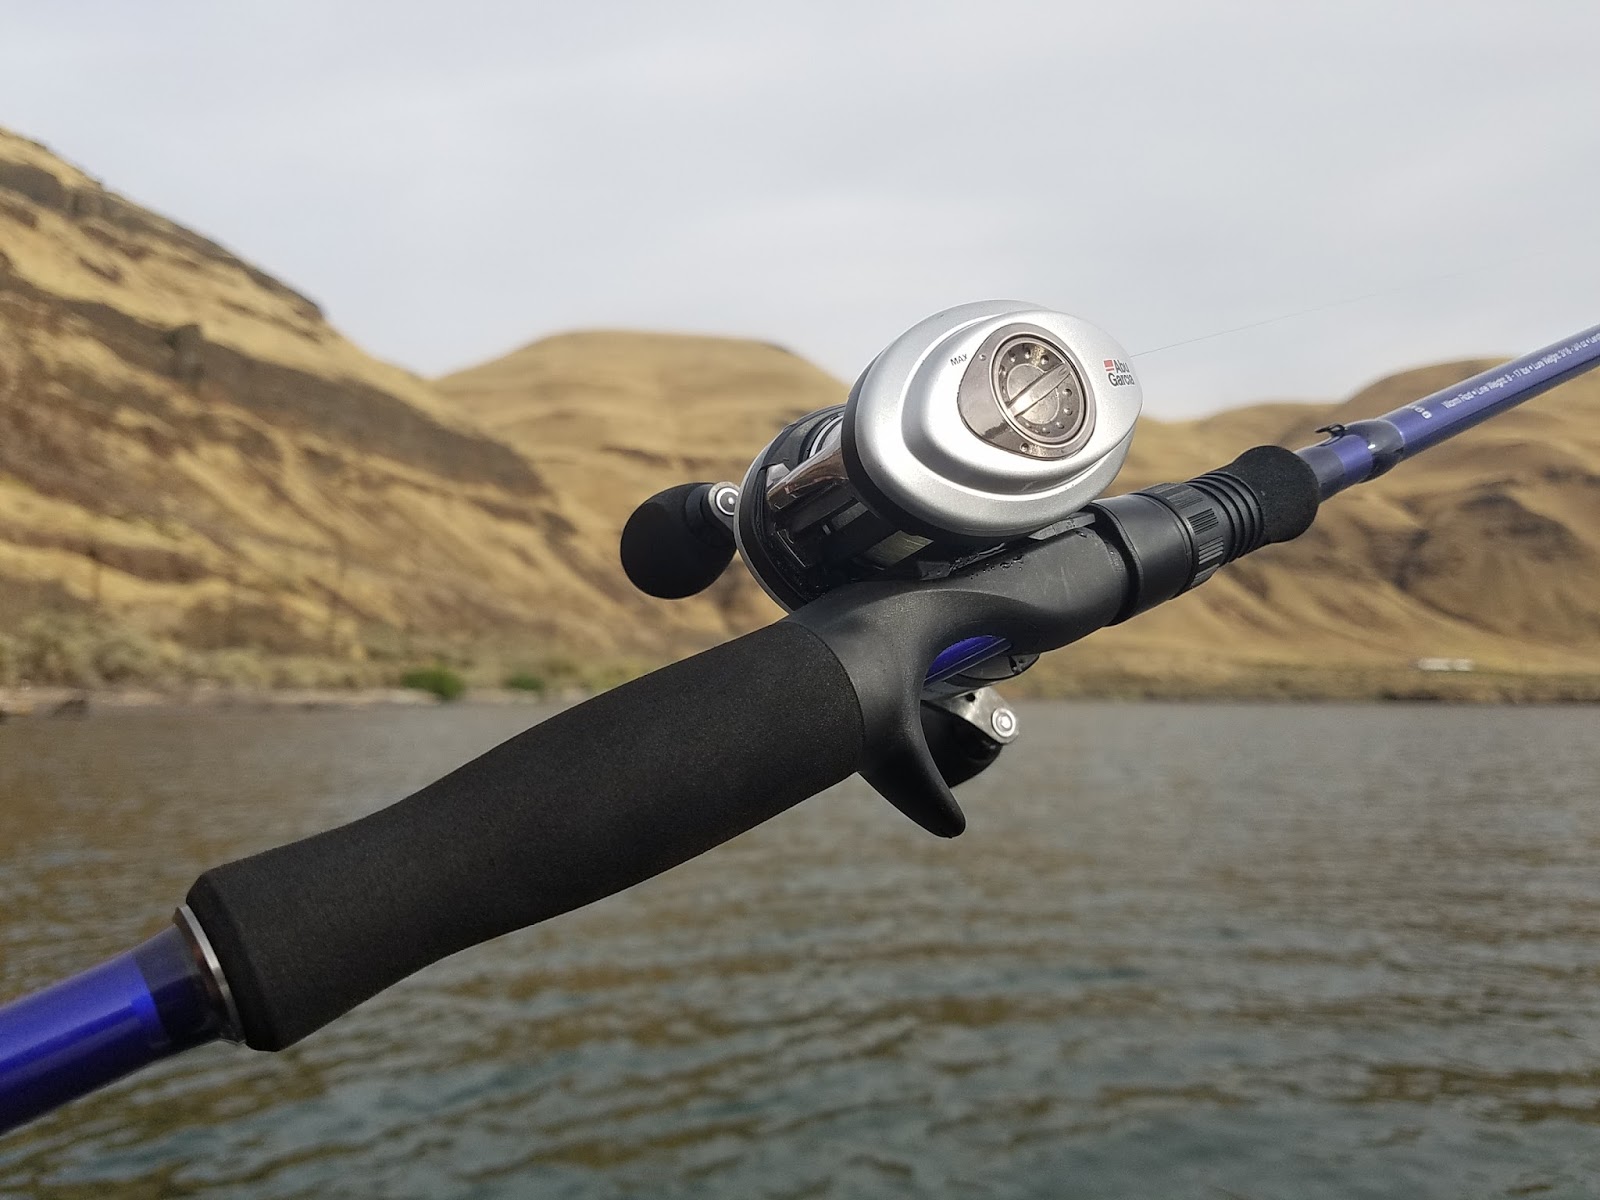 T Brinks Fishing: CastAway Taranis Carbon Extreme Rod Review